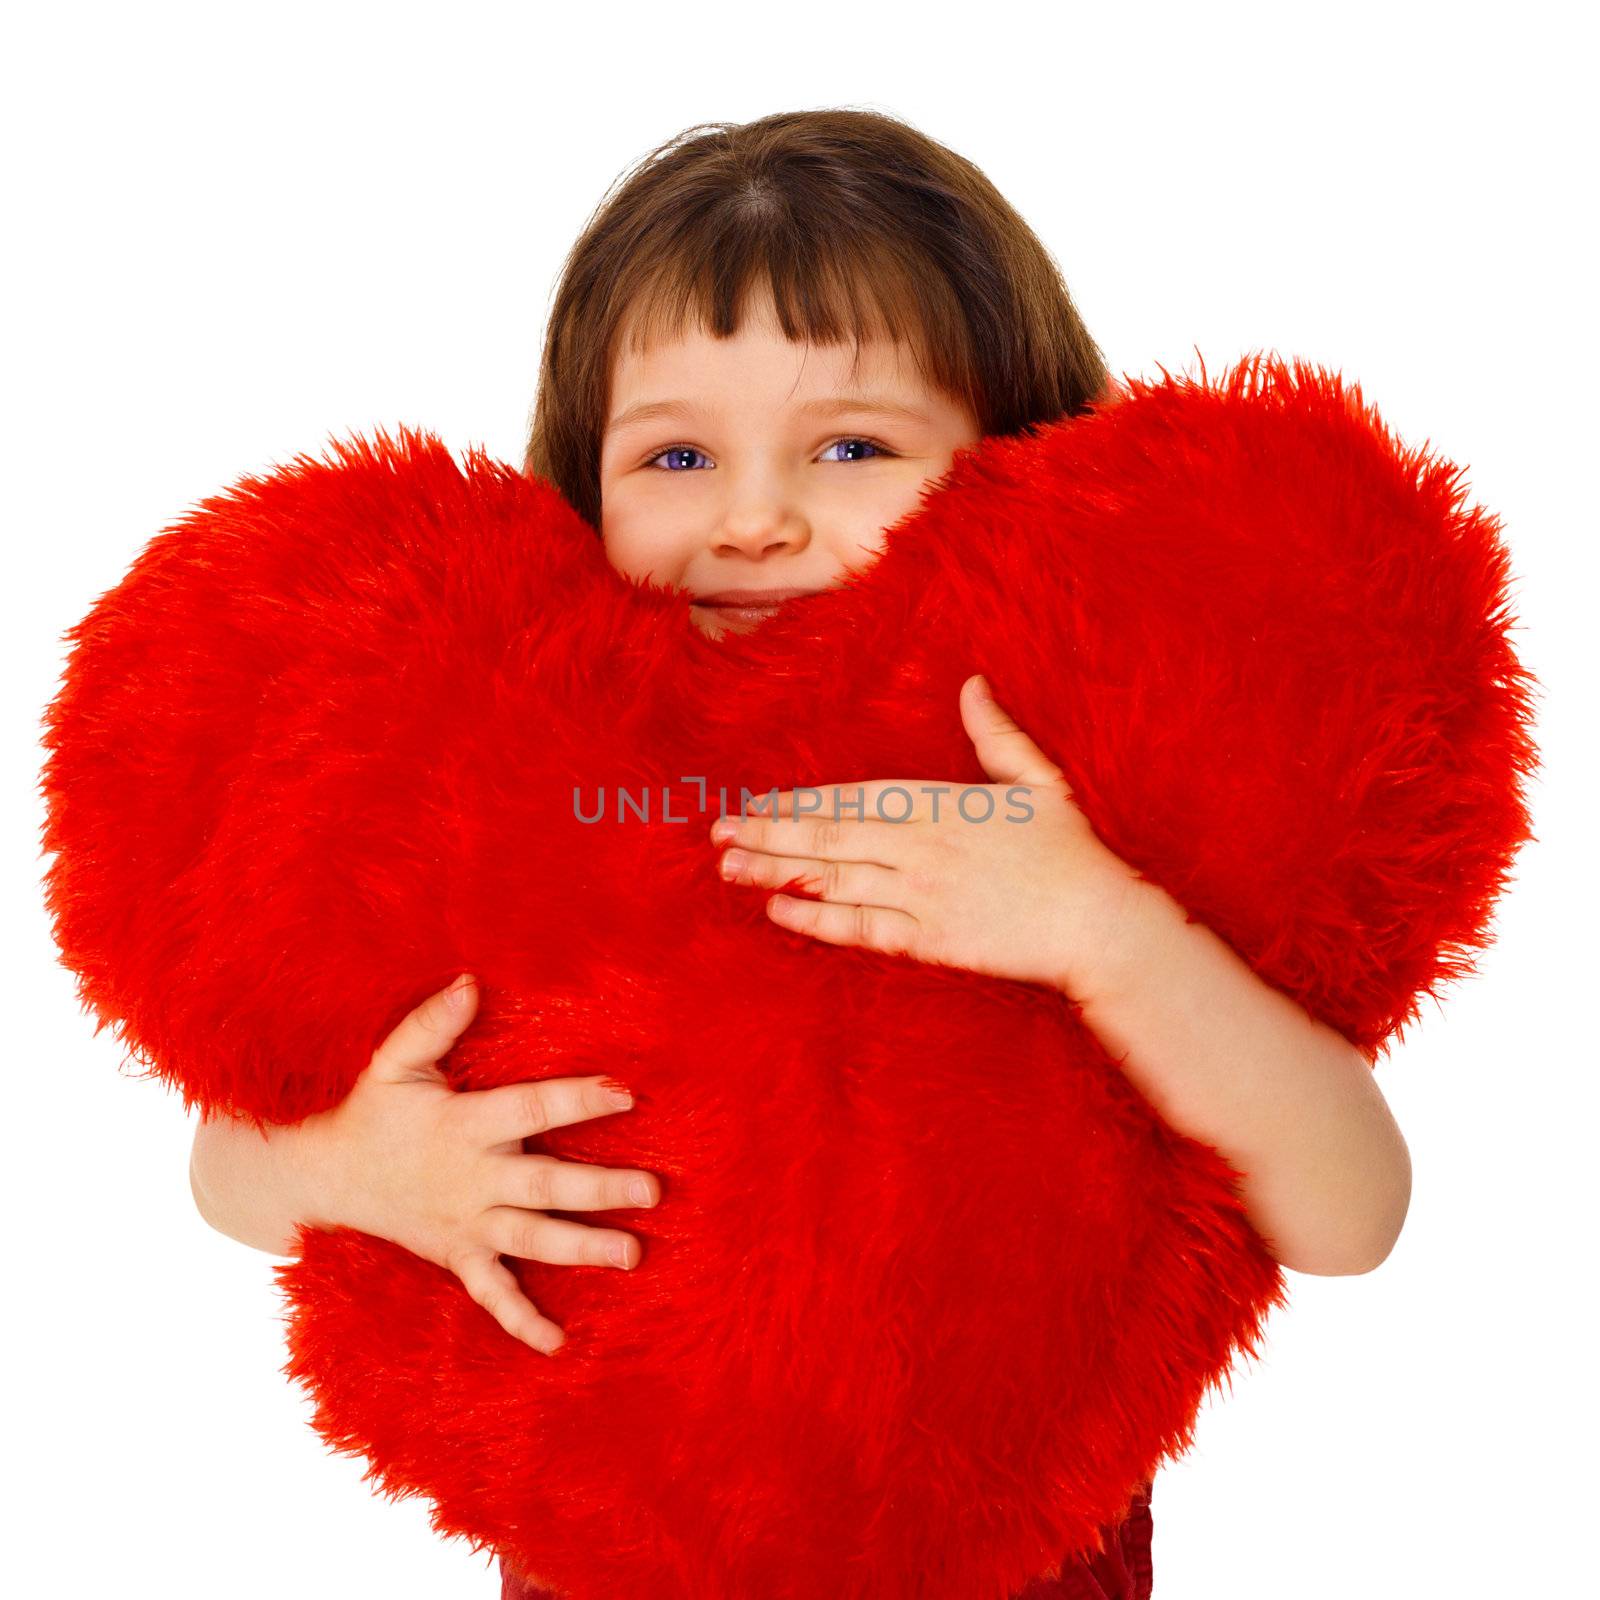 Little girl hugging a large toy heart by pzaxe